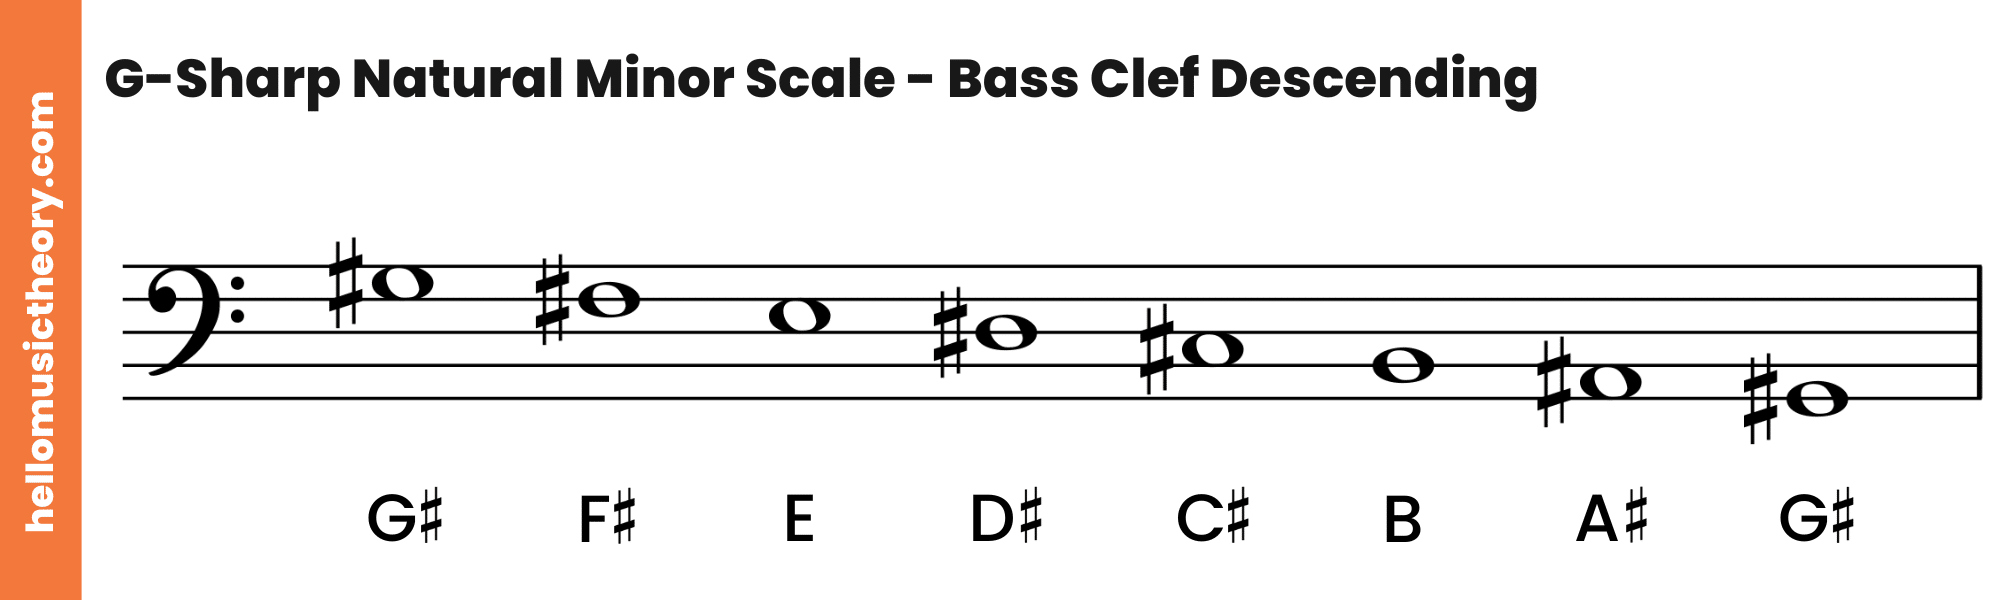 G-Sharp Natural Minor Scale Bass Clef Descending